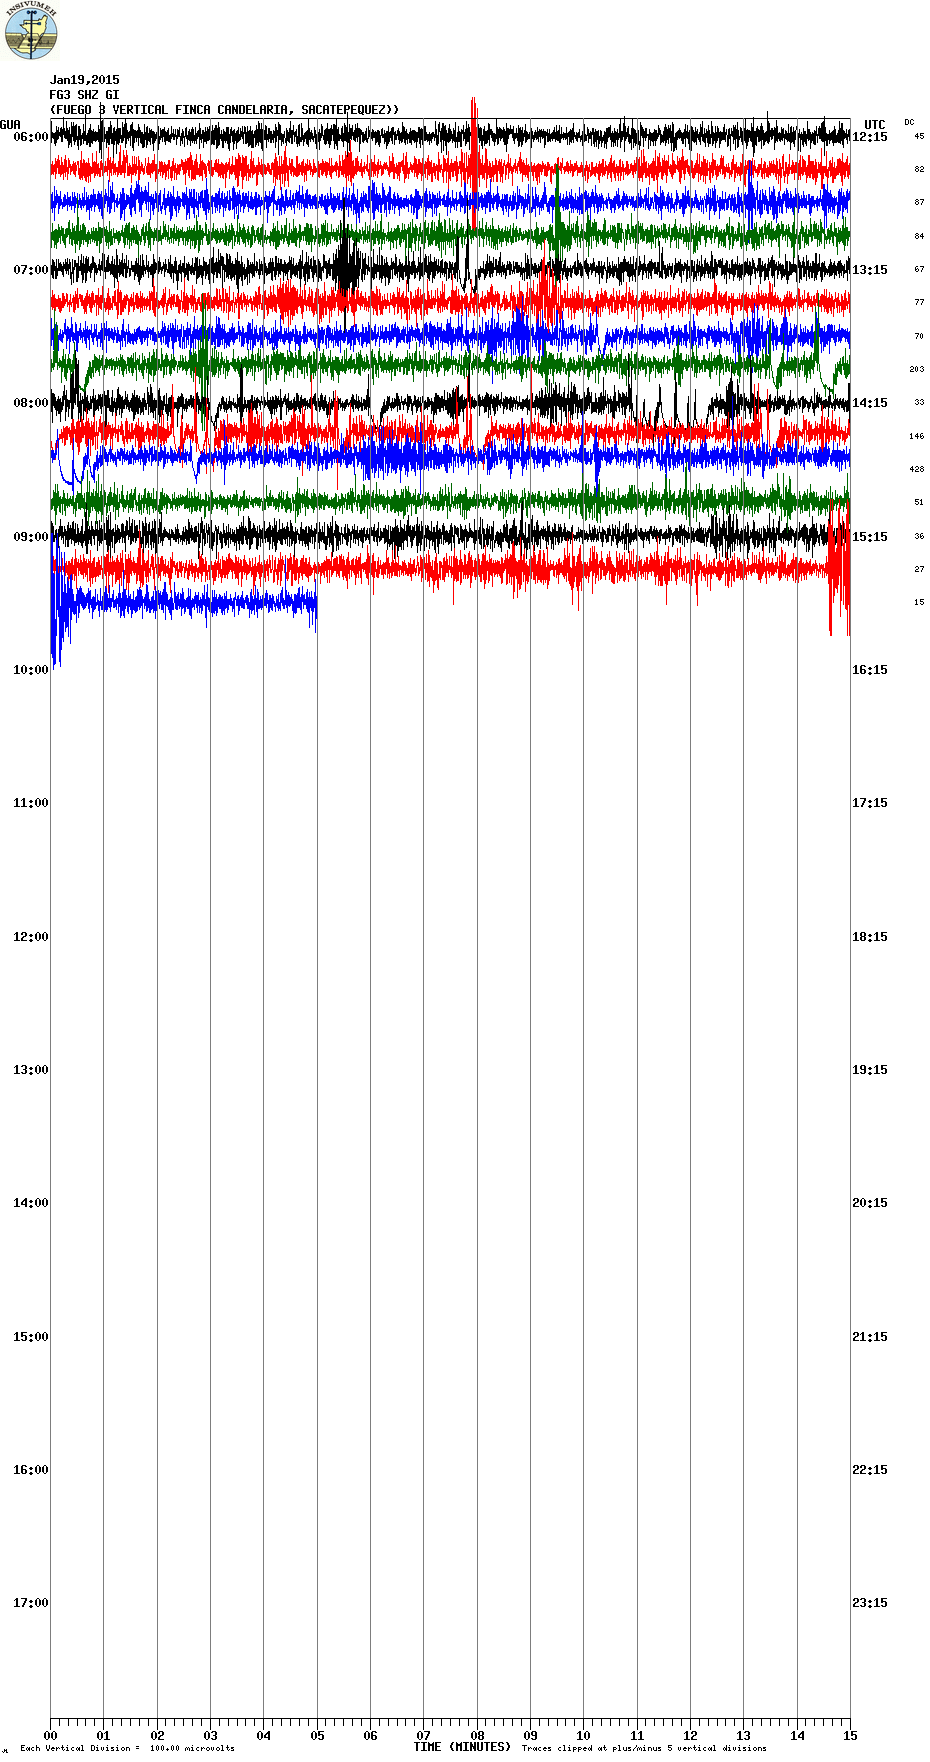 Current seismic signal at Fuego (FG3 station, INSIVUMEH)